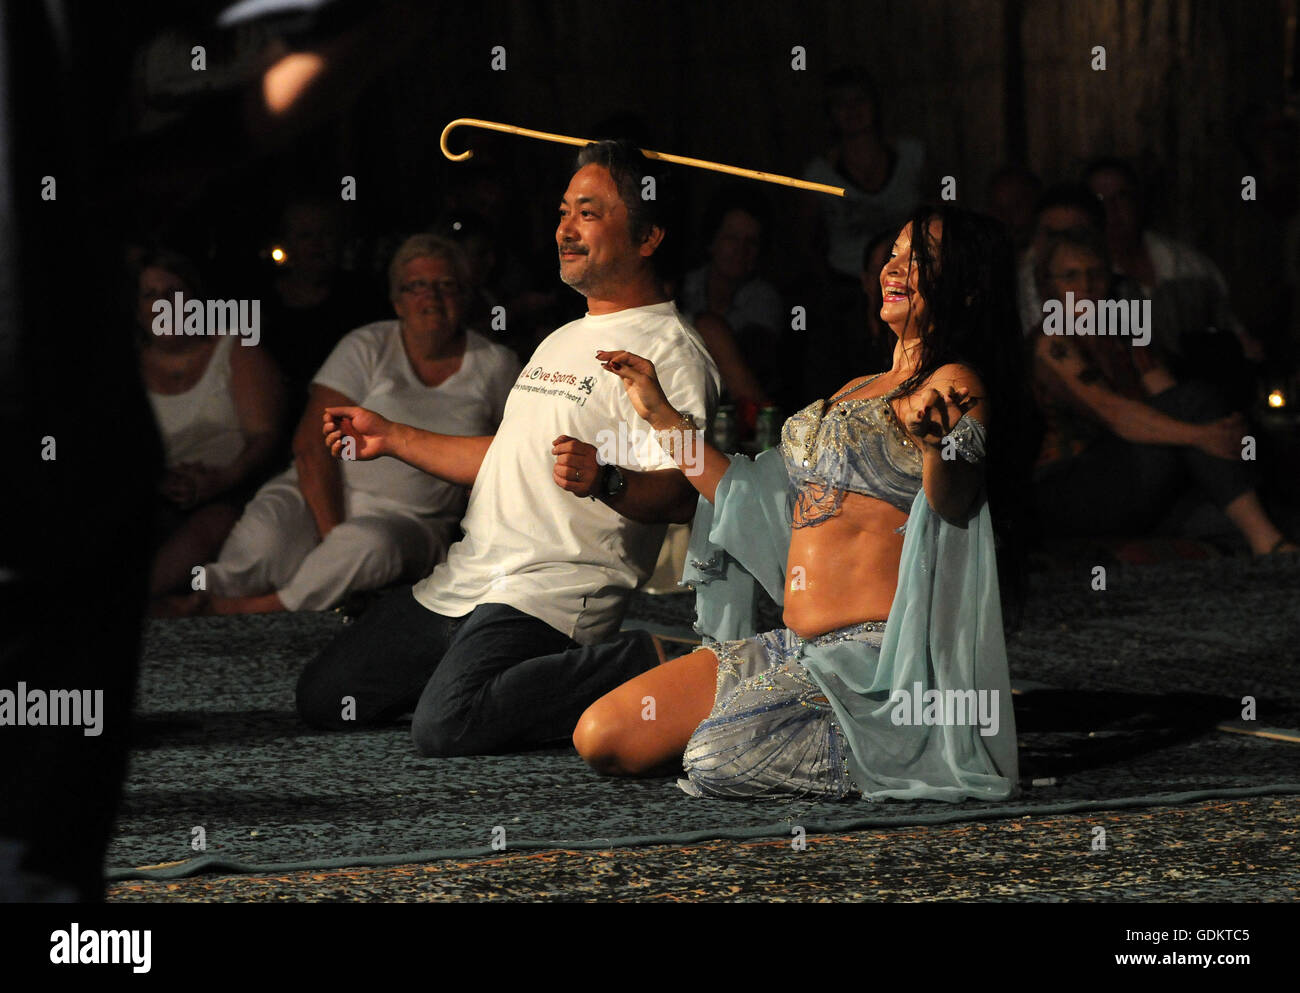 A belly dancer and a guest perform together, Dubai, UAE. Stock Photo